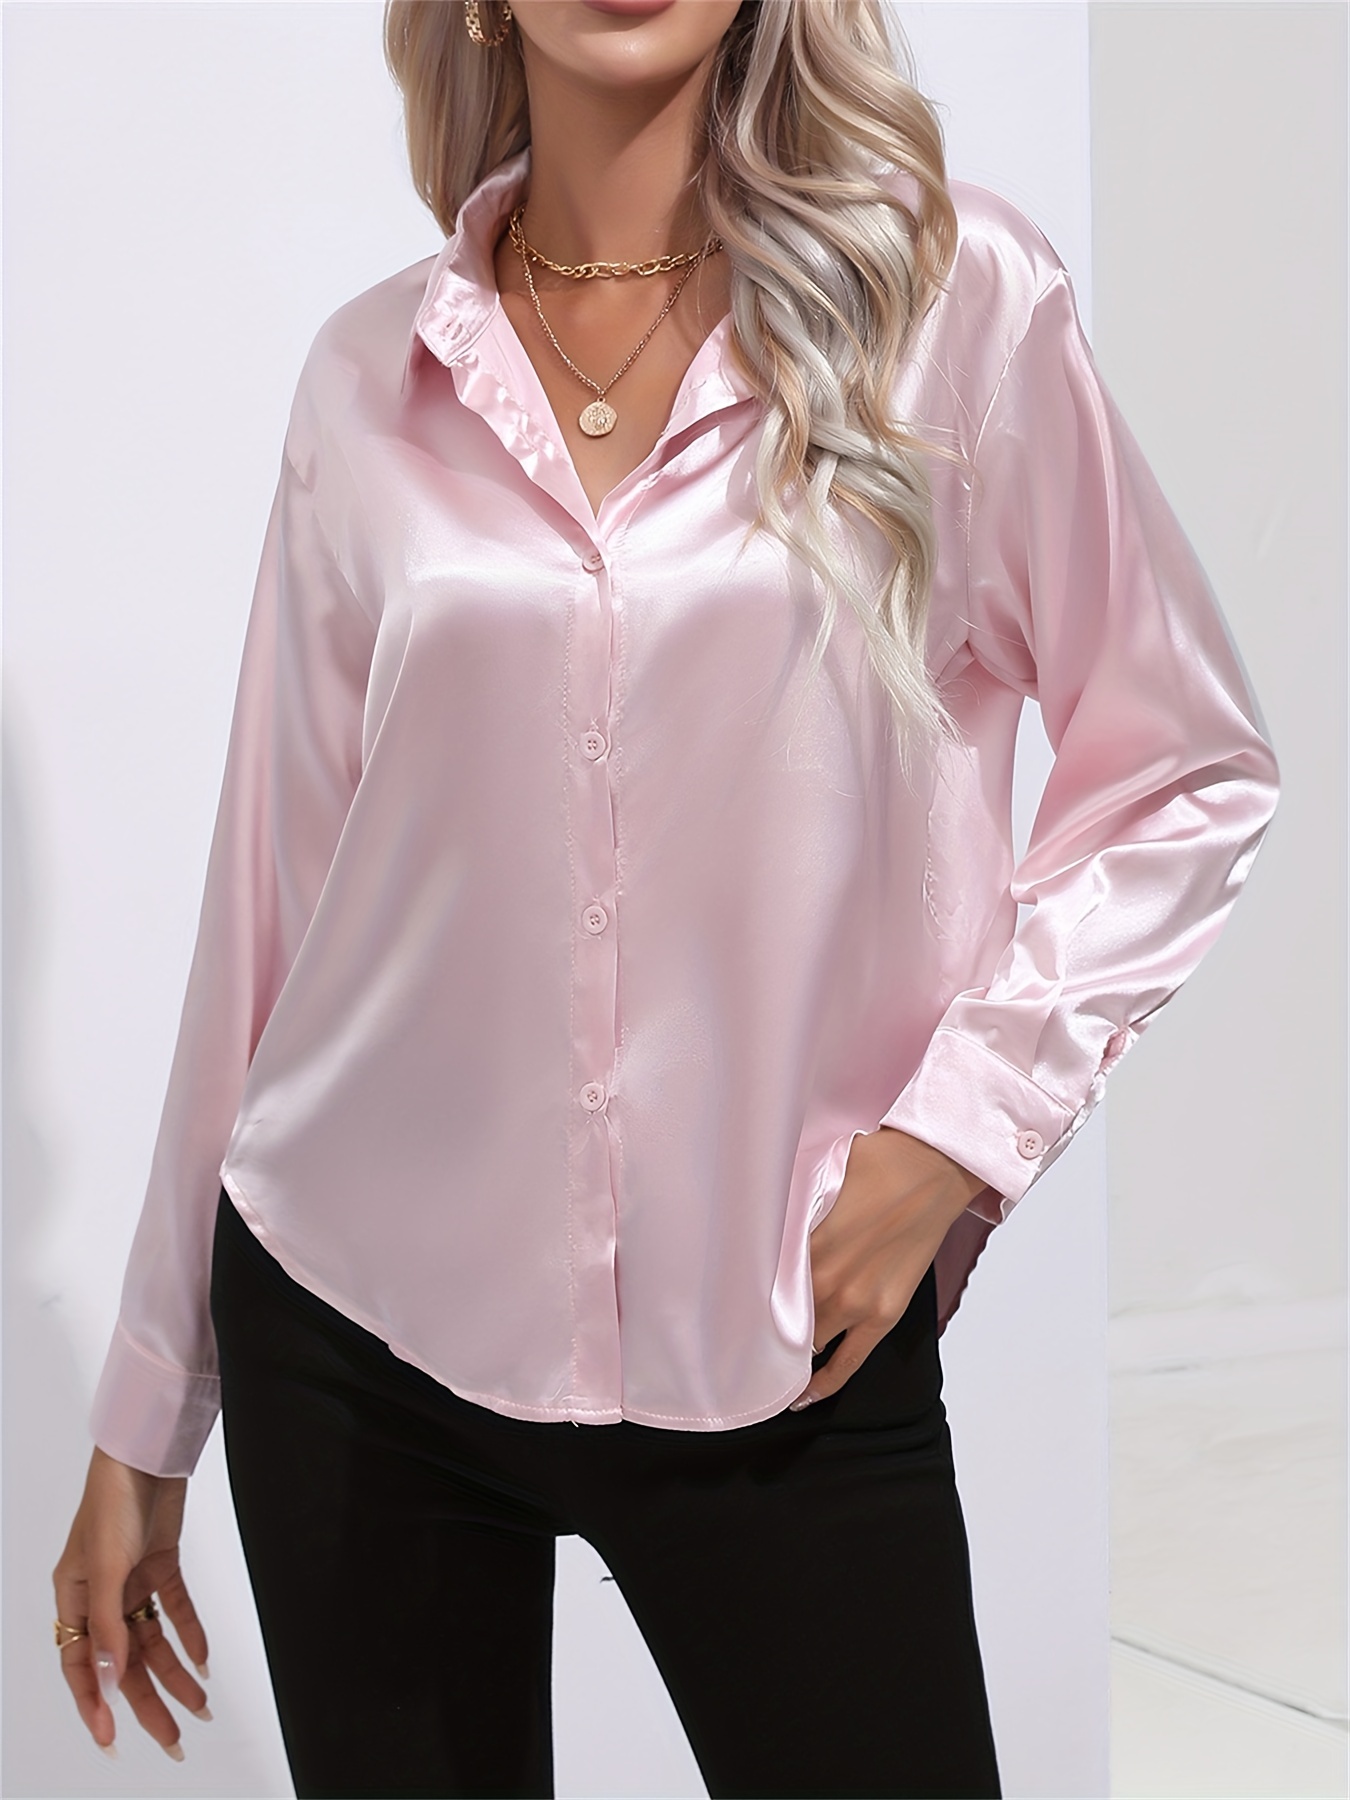 solid smoothly shirt, solid smoothly shirt elegant button front turn down collar long sleeve shirt womens clothing details 45